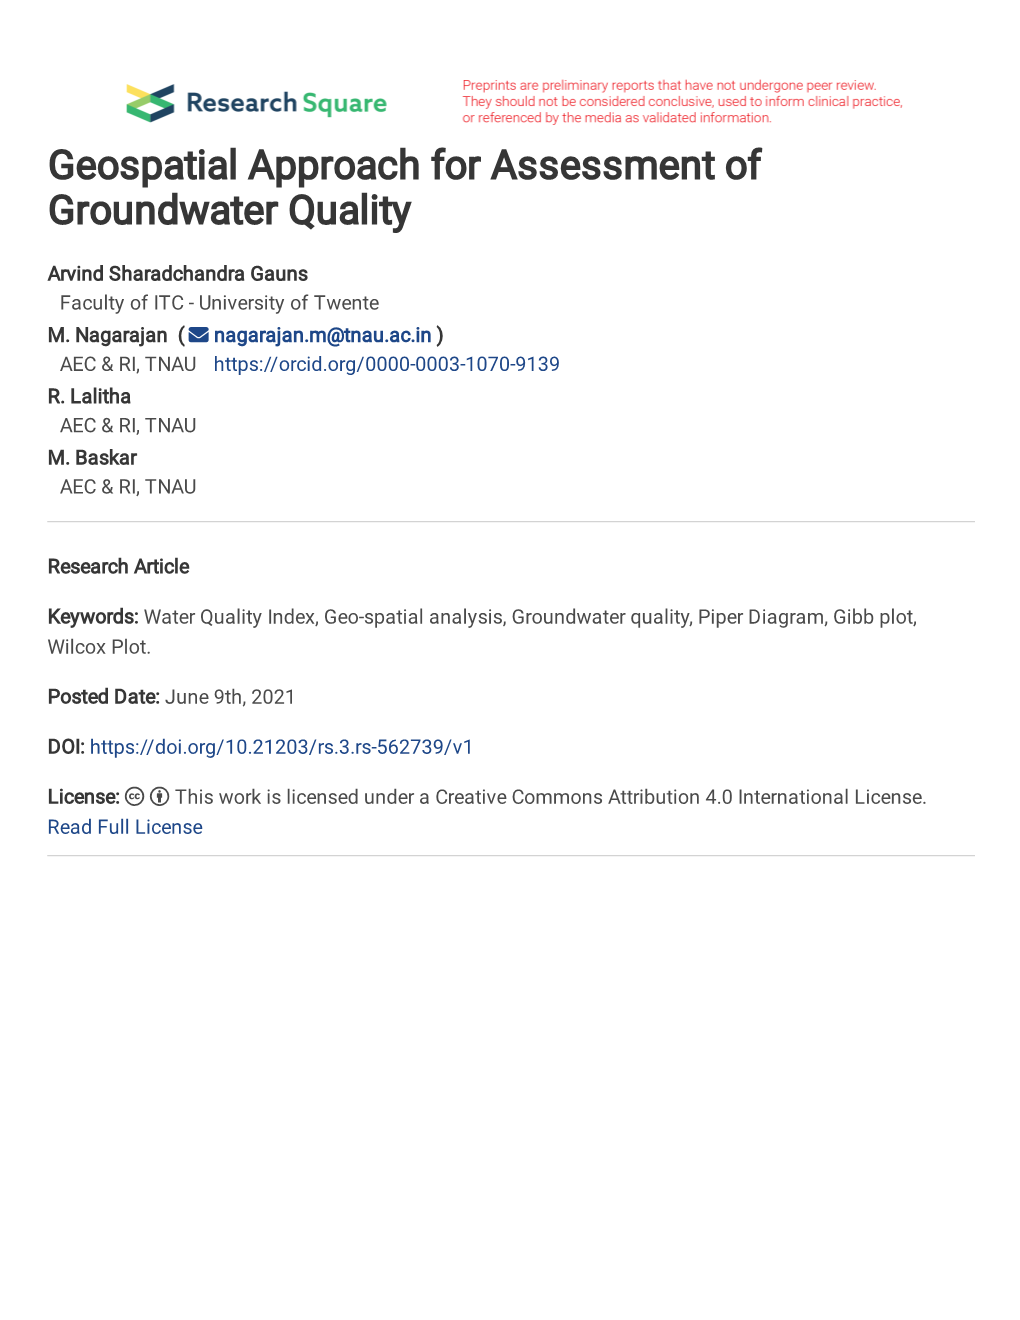 Geospatial Approach for Assessment of Groundwater Quality